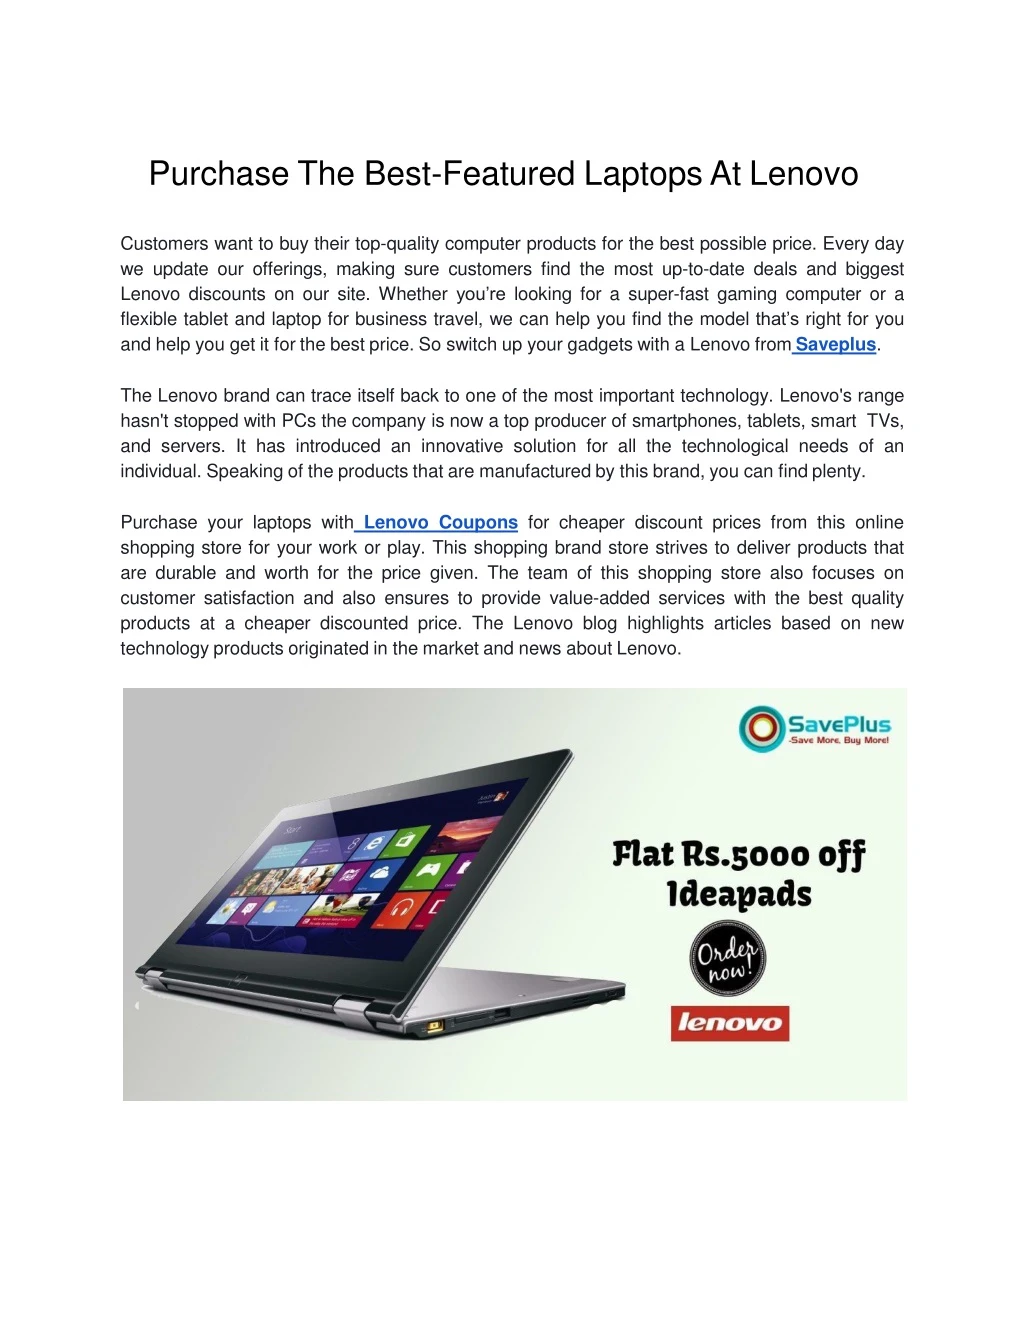 purchase the best featured laptops at lenovo